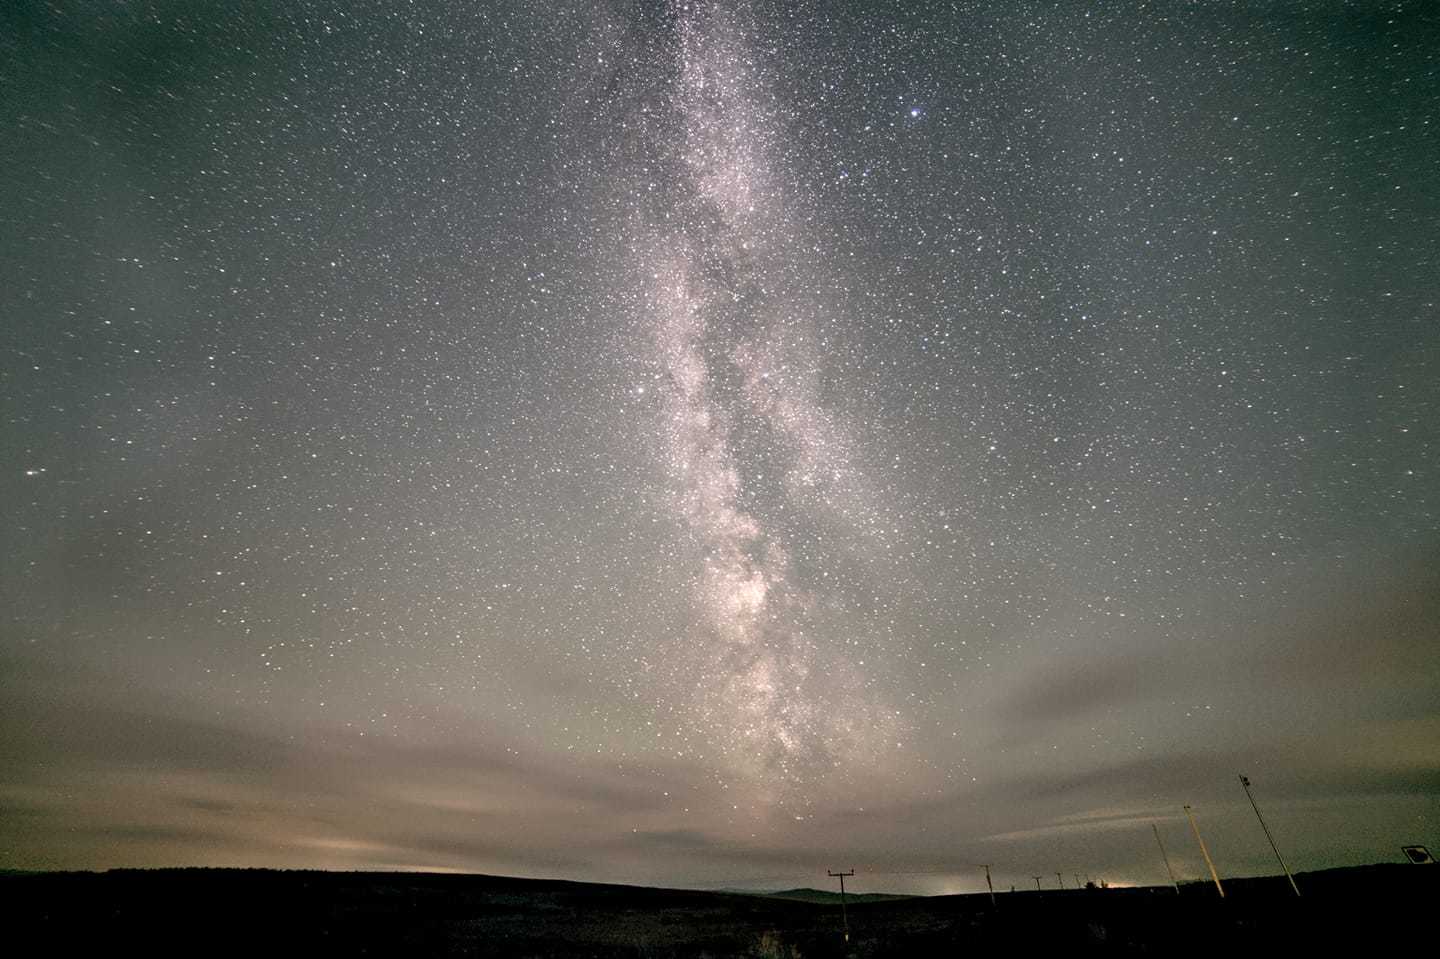 Photos of stars and meteors above Denbigh Moors at the weekend. Photos by Mike Nawikas.